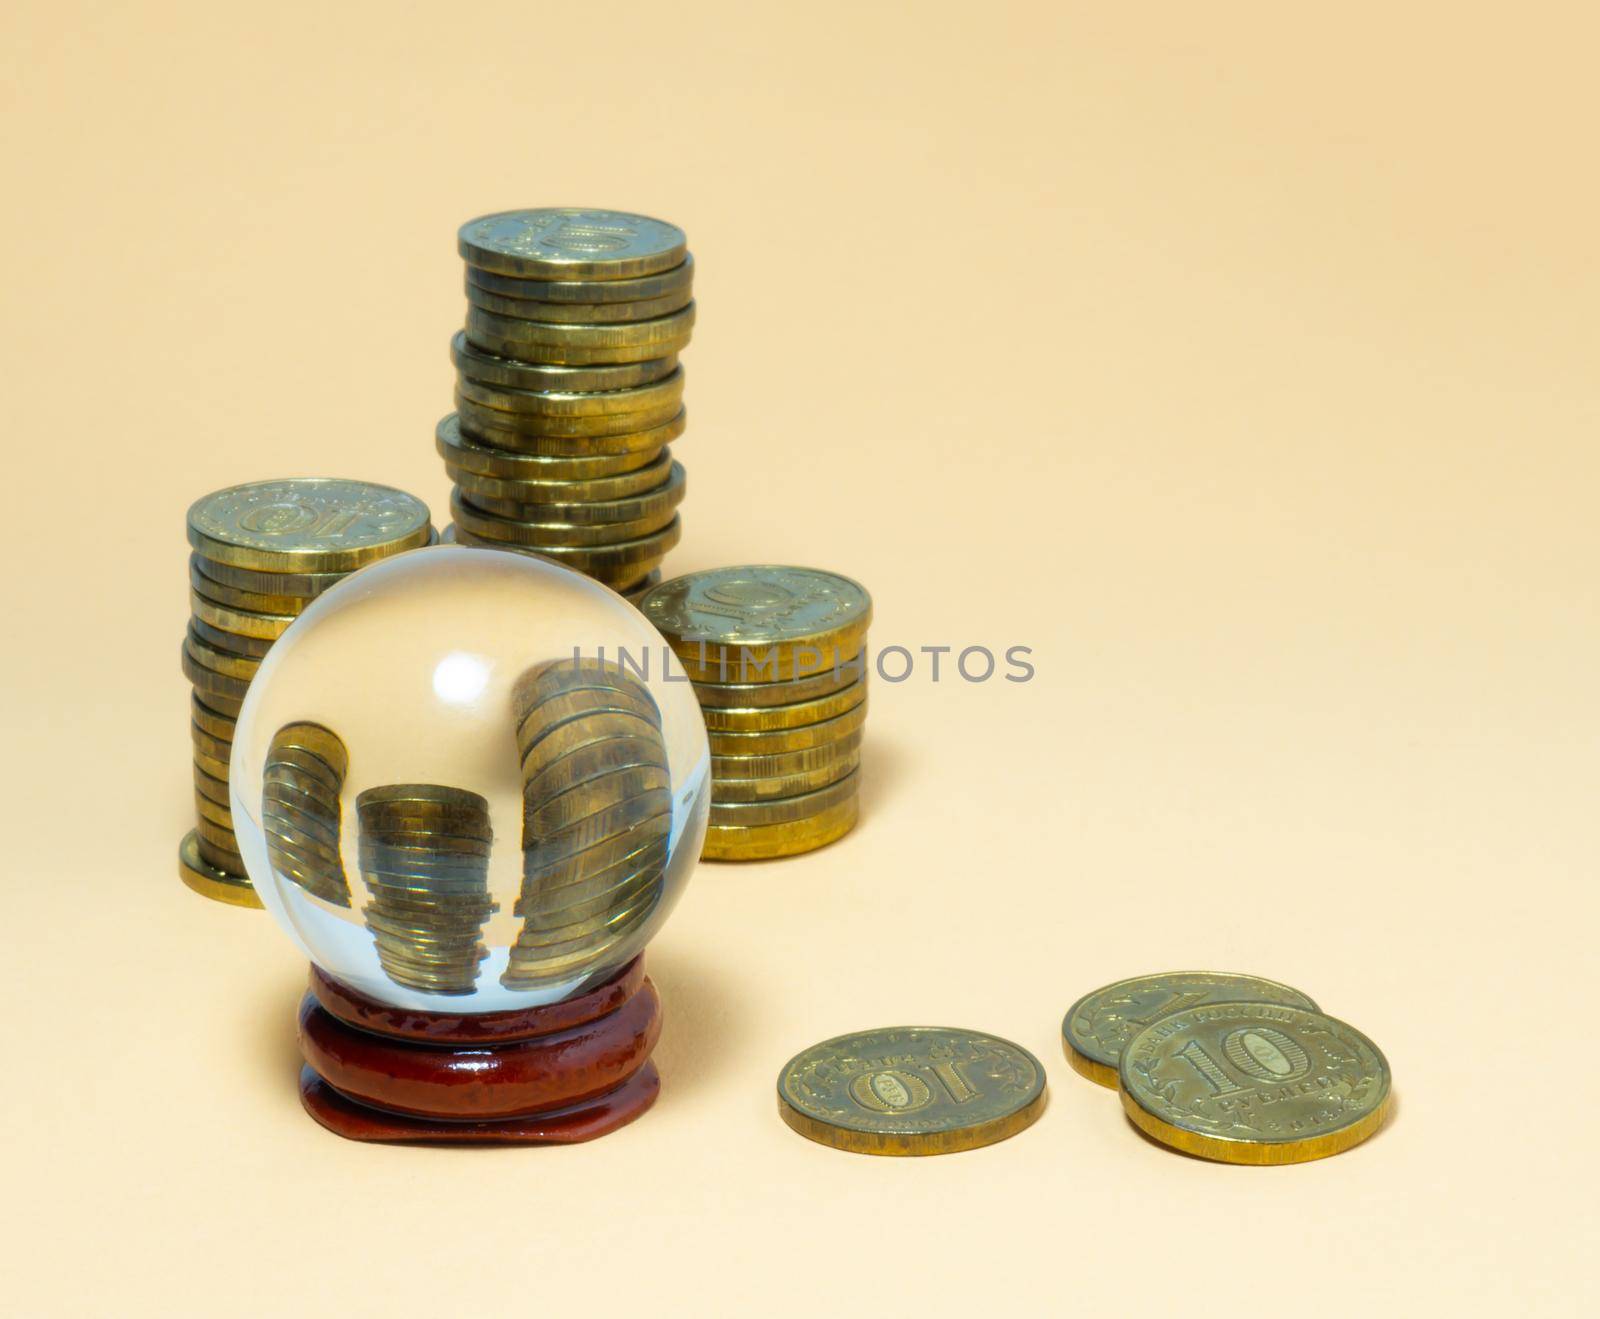 Pyramids of coins are reflected in a glass ball. by Puludi